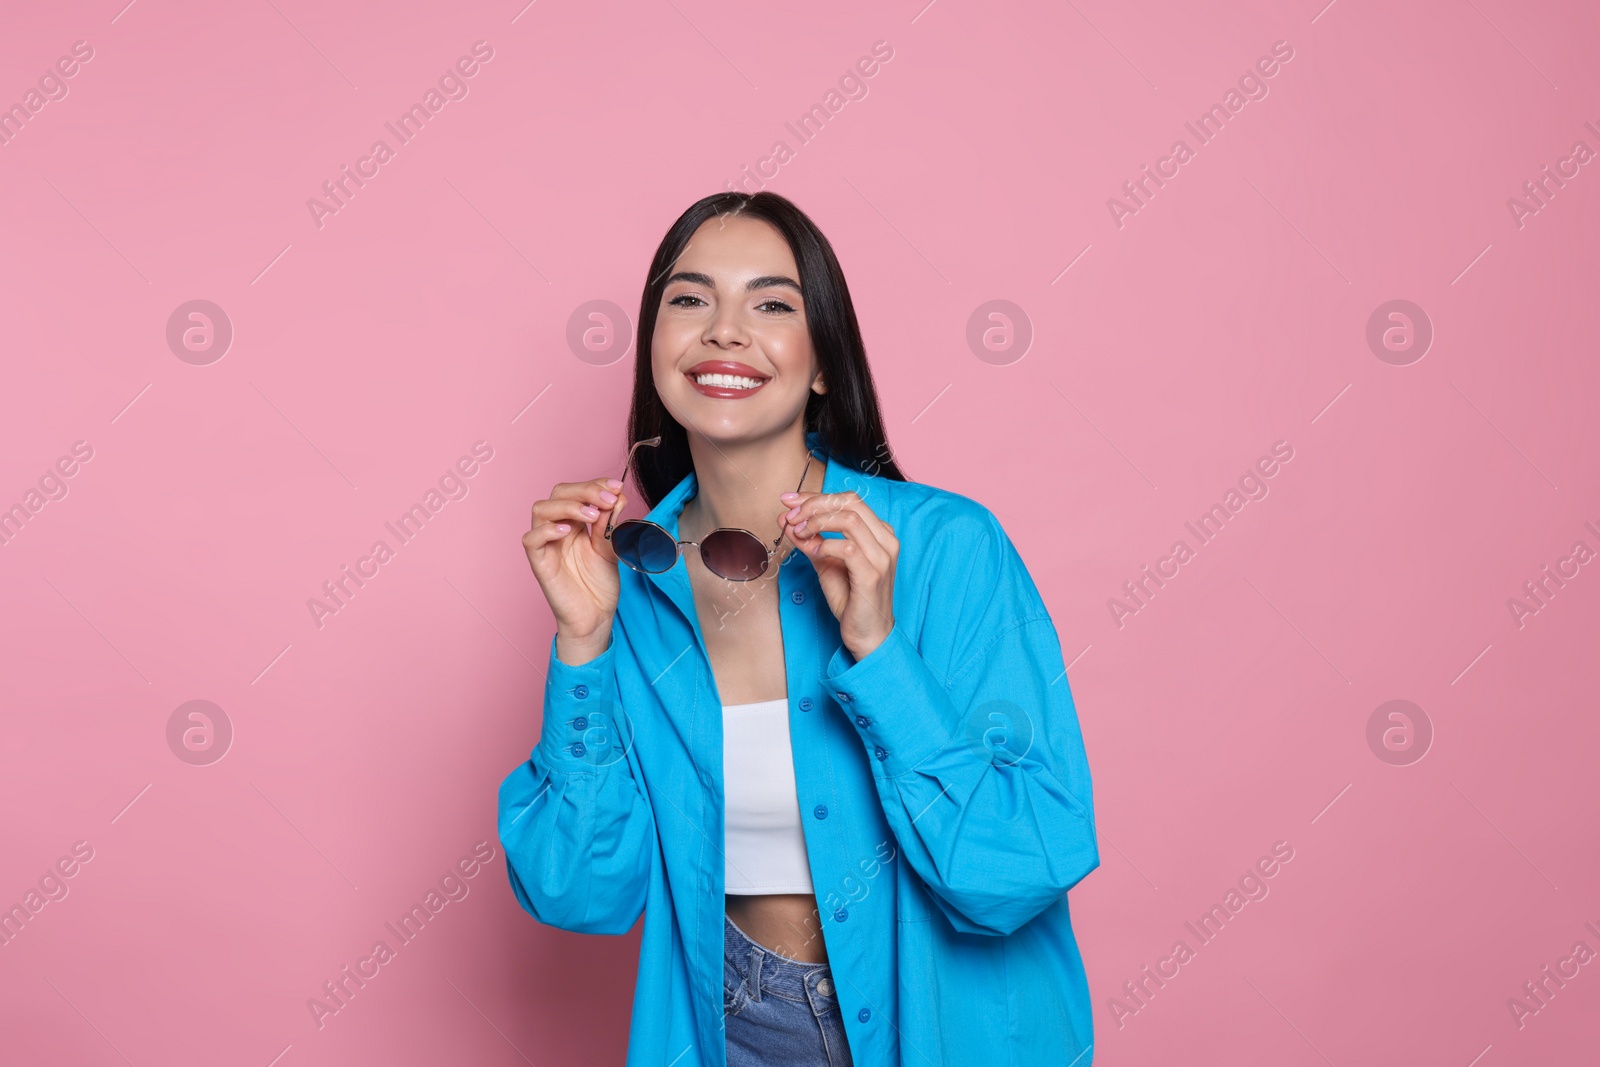 Photo of Attractive happy woman holding fashionable sunglasses against pink background. Space for text